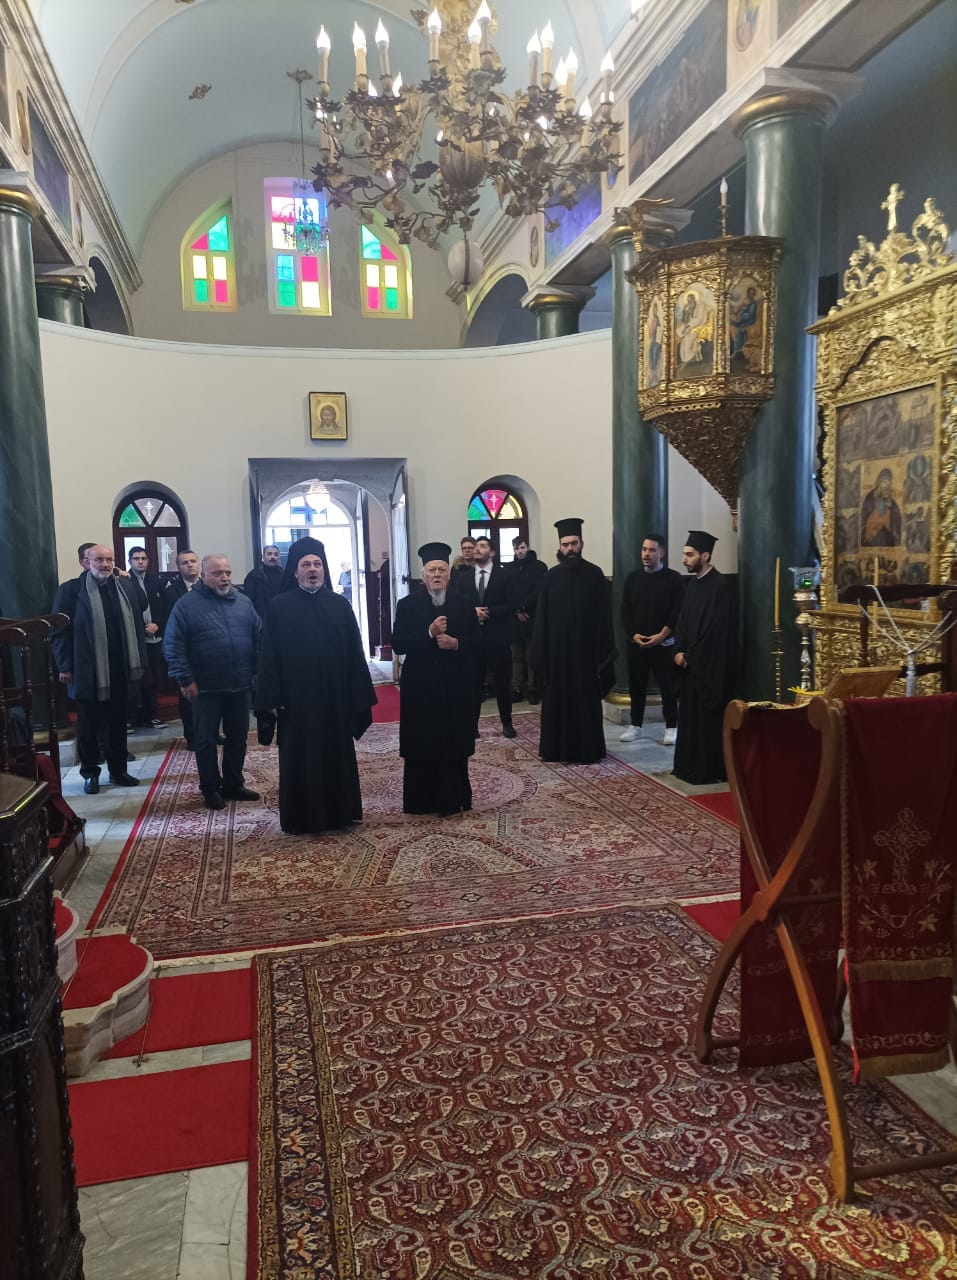 The Vespers for the Feast of Saint Photios the Great at the Theological School of Halki